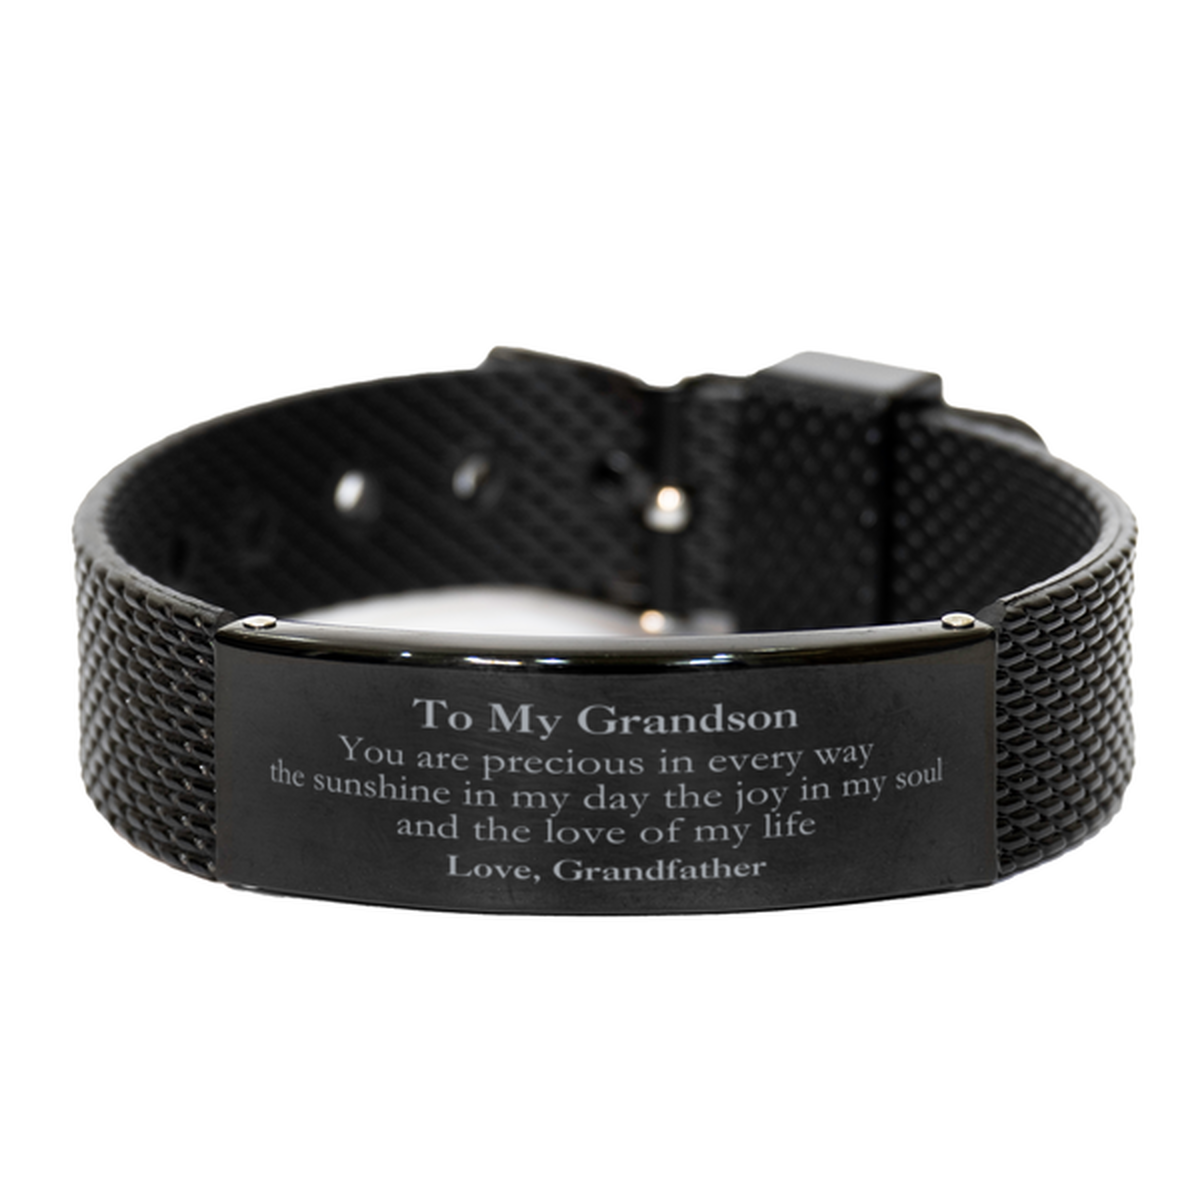 Graduation Gifts for Grandson Black Shark Mesh Bracelet Present from Grandfather, Christmas Grandson Birthday Gifts Grandson You are precious in every way the sunshine in my day. Love, Grandfather